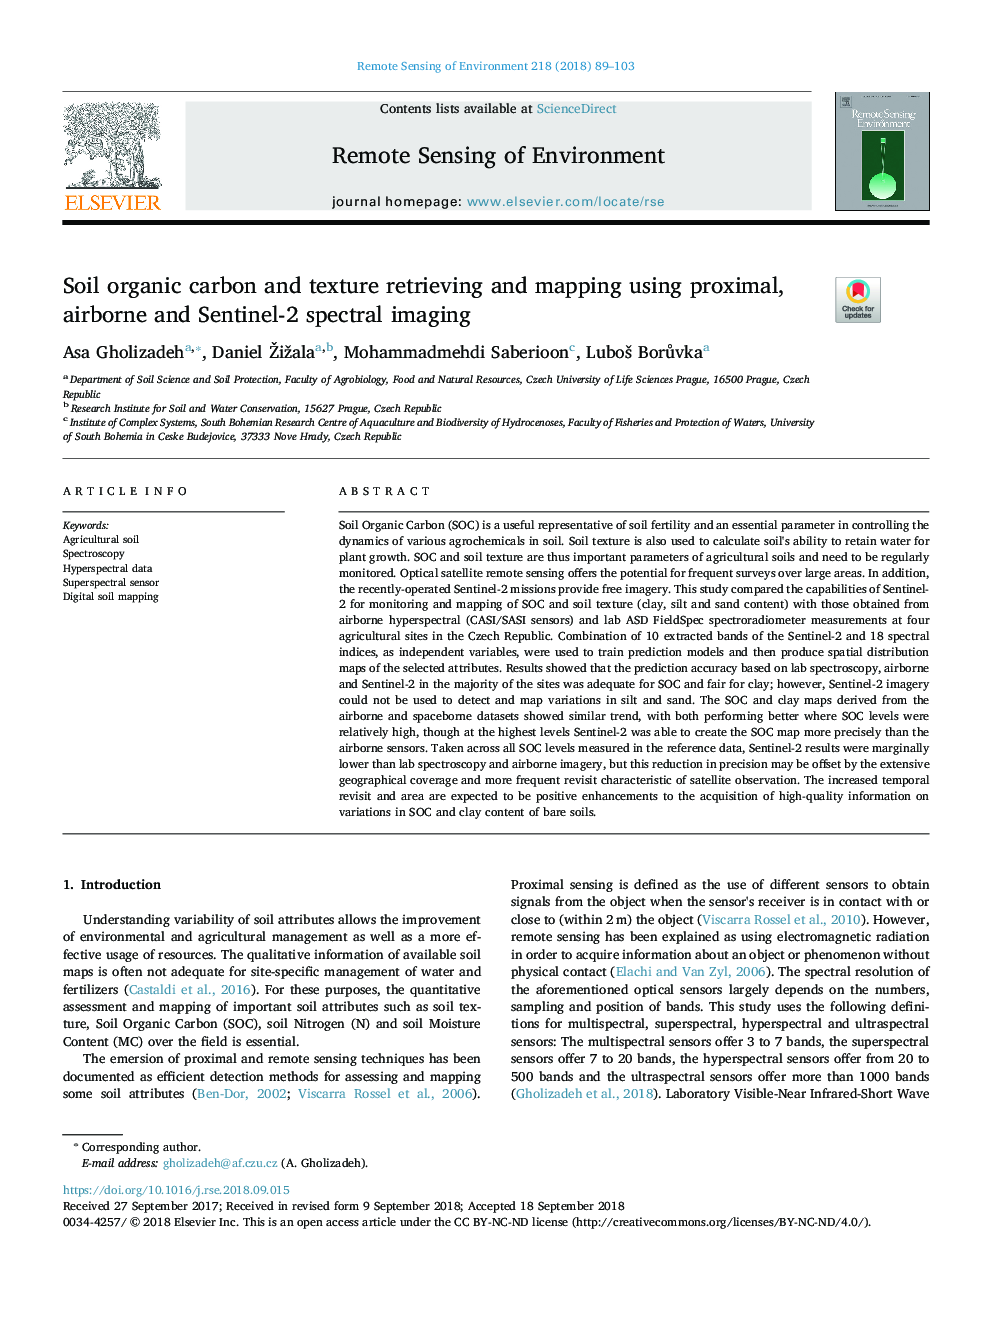 Soil organic carbon and texture retrieving and mapping using proximal, airborne and Sentinel-2 spectral imaging